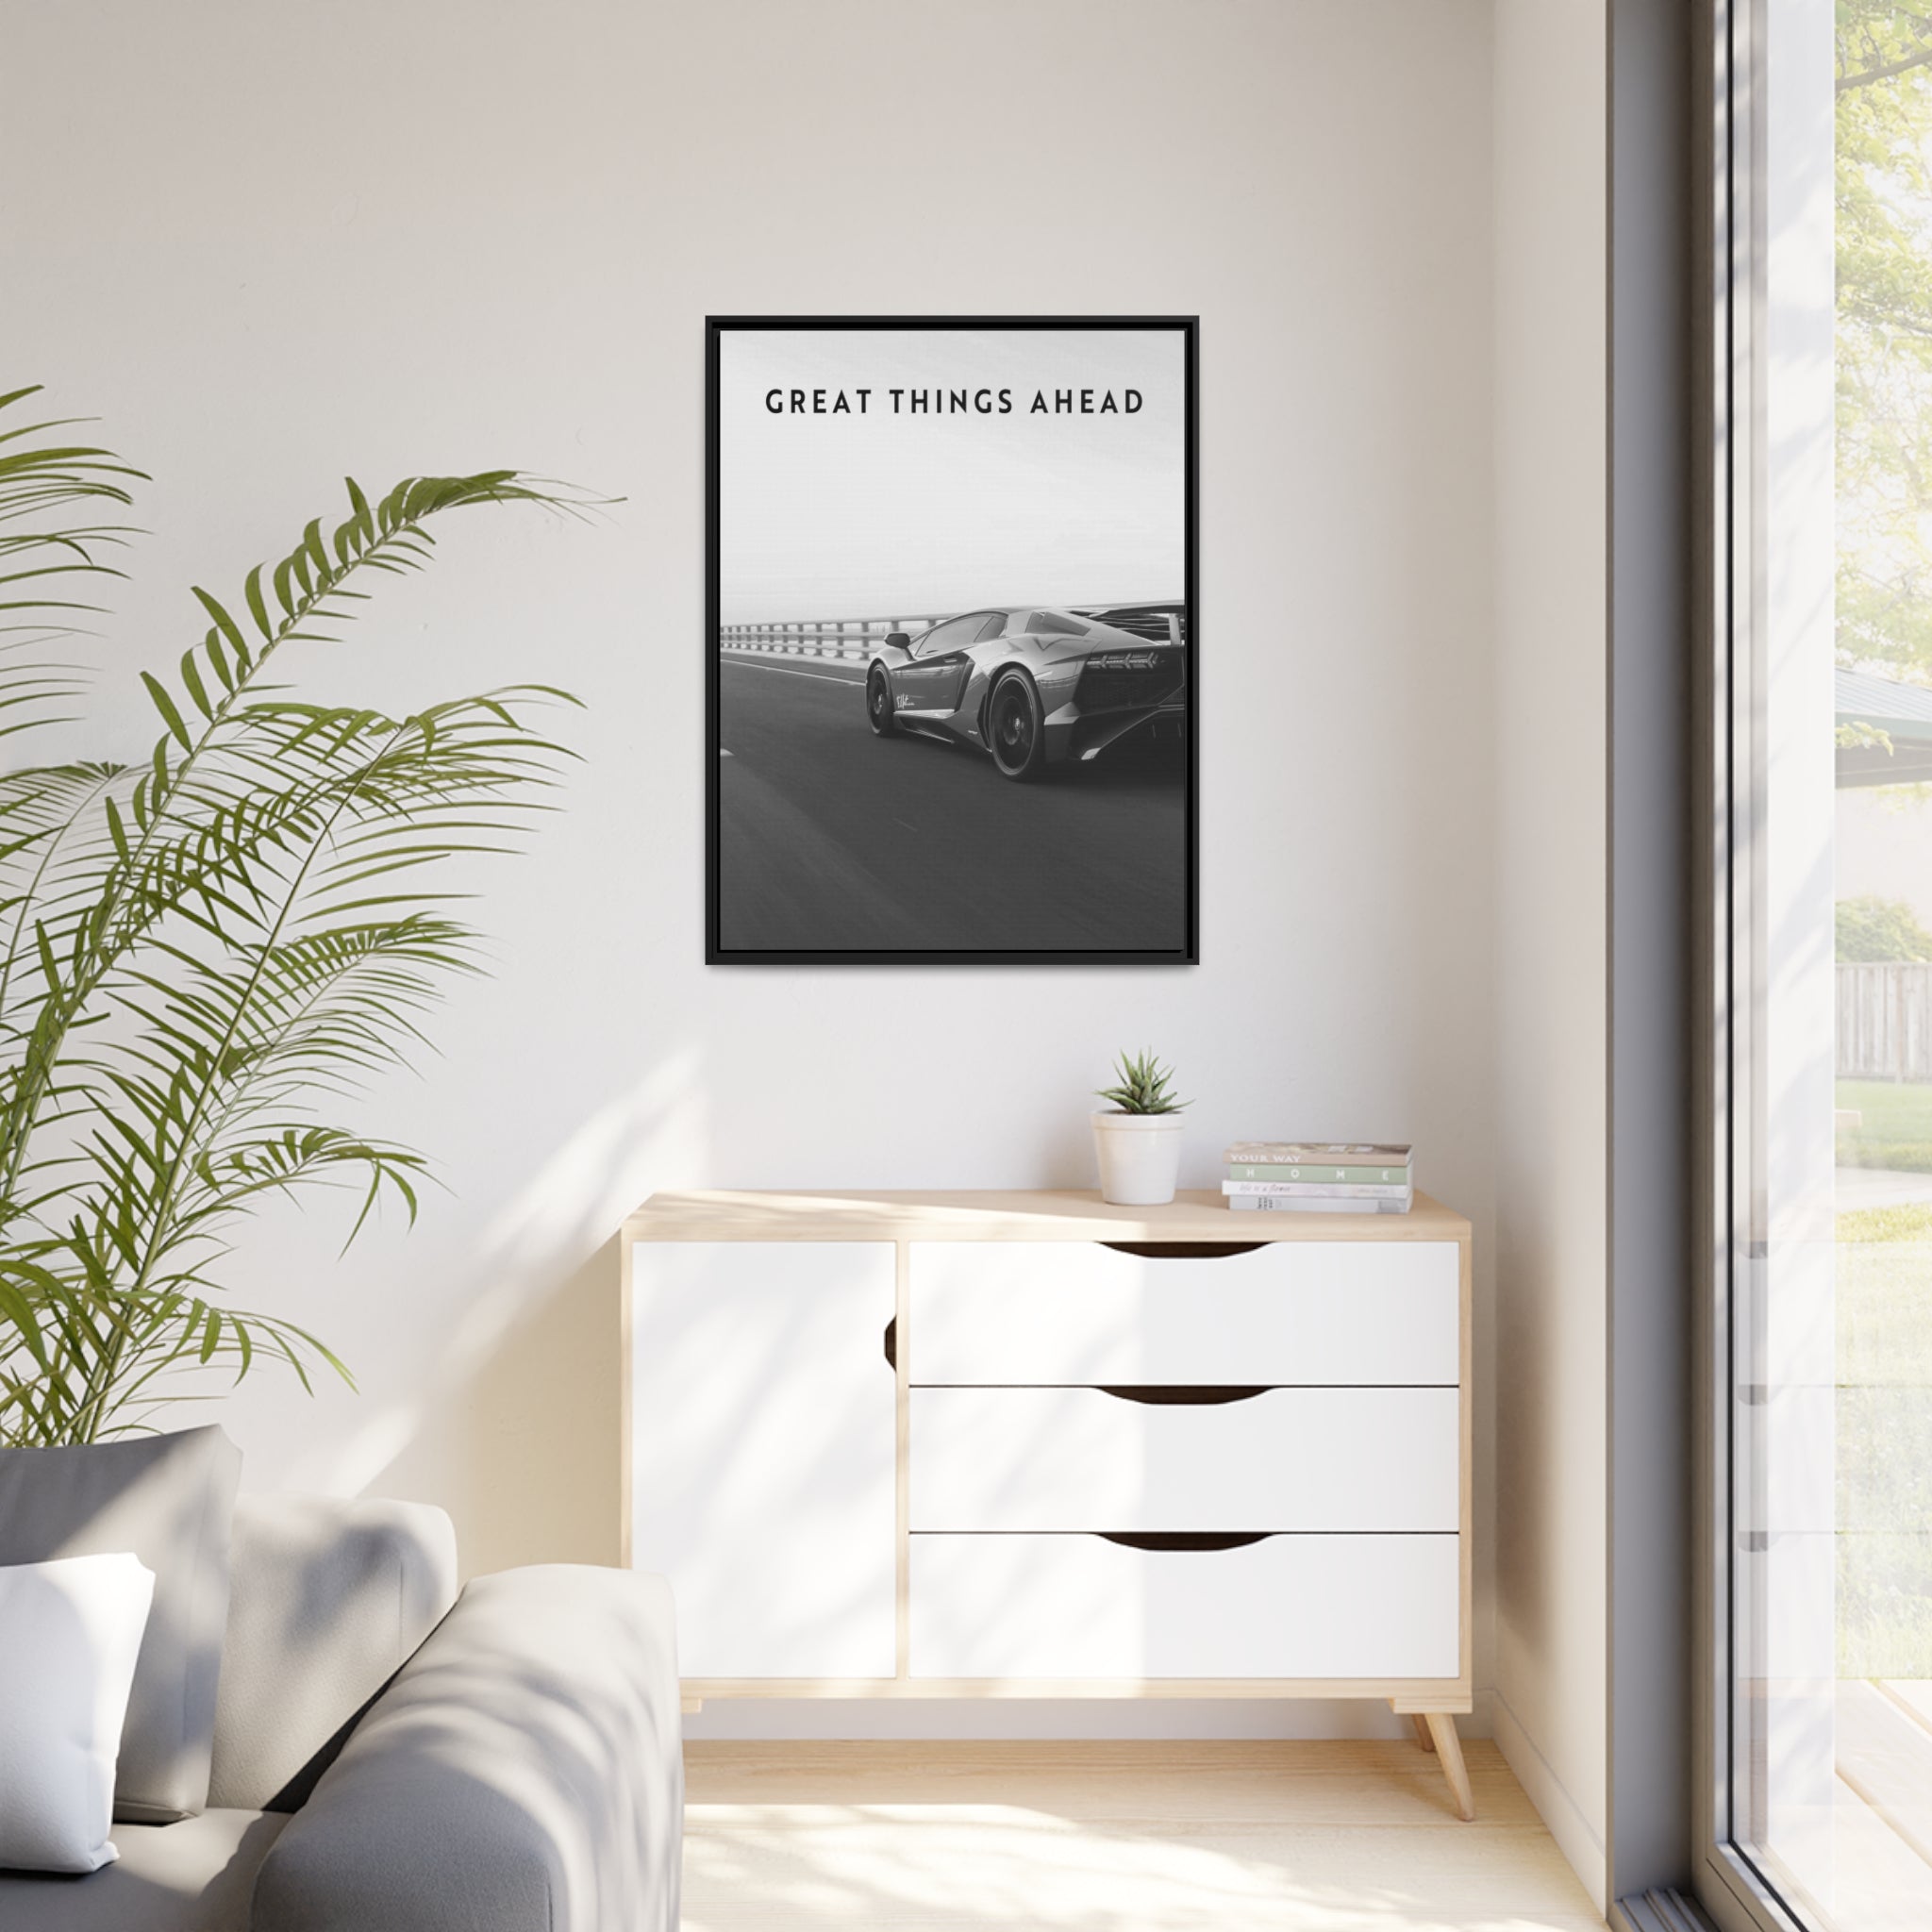 Great Things Ahead - Sports Car Black And White - Wall Art additional image 7